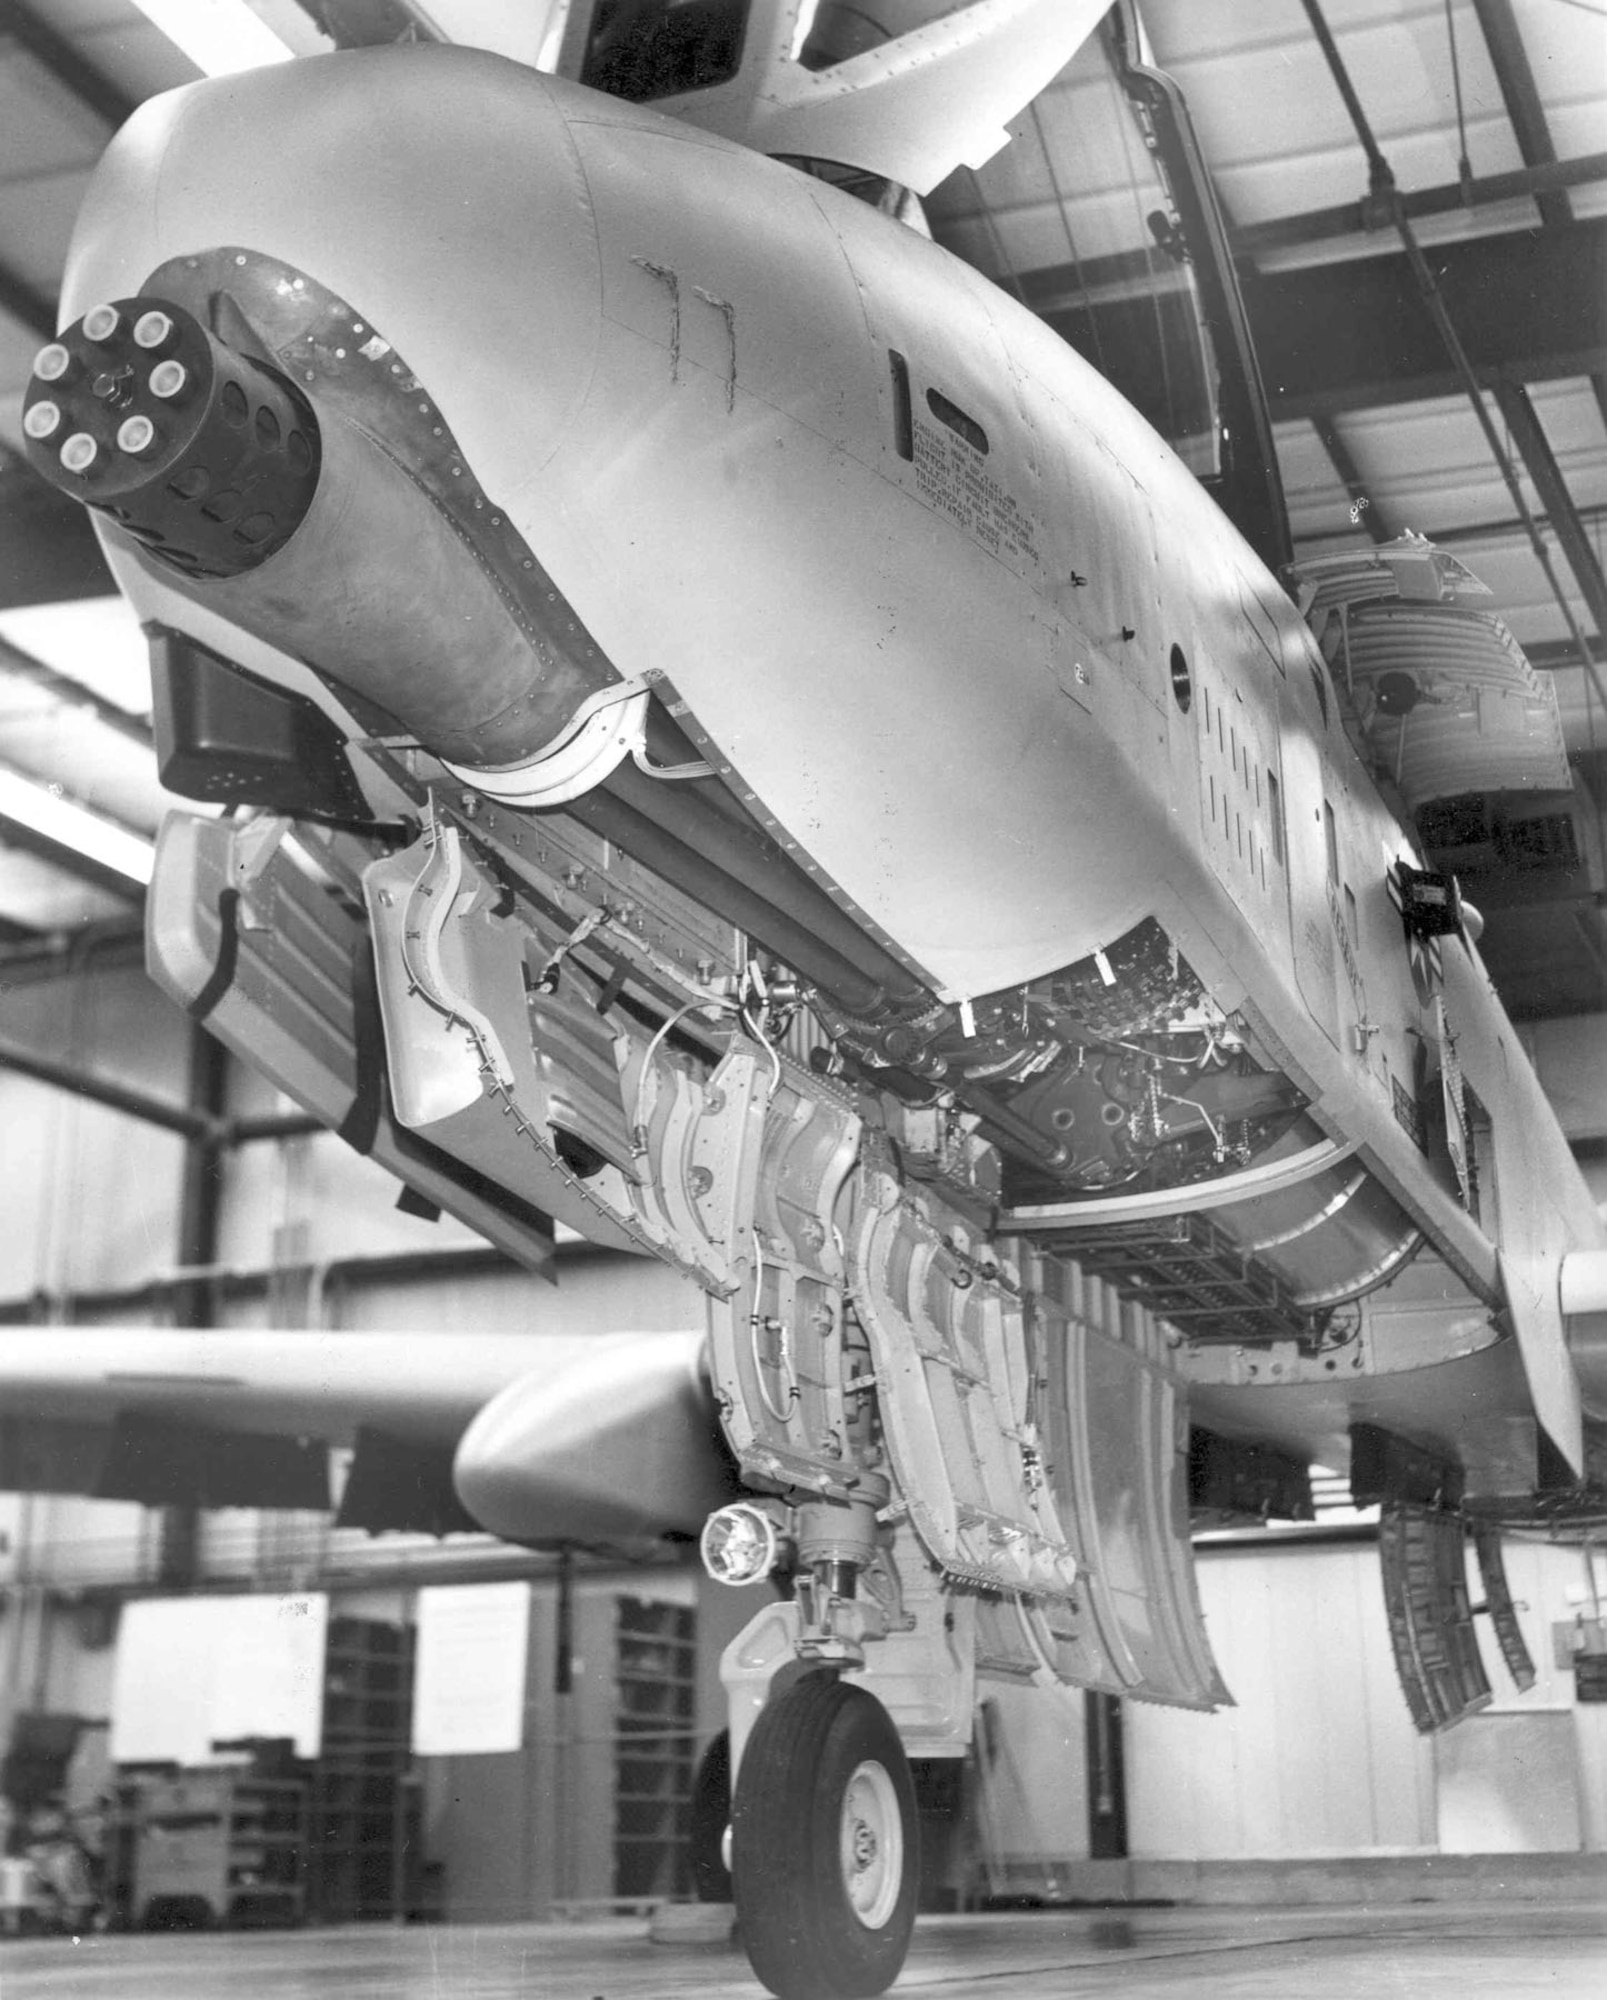 General Electric GAU-8/A installed, with access panels open. (U.S. Air Force photo)